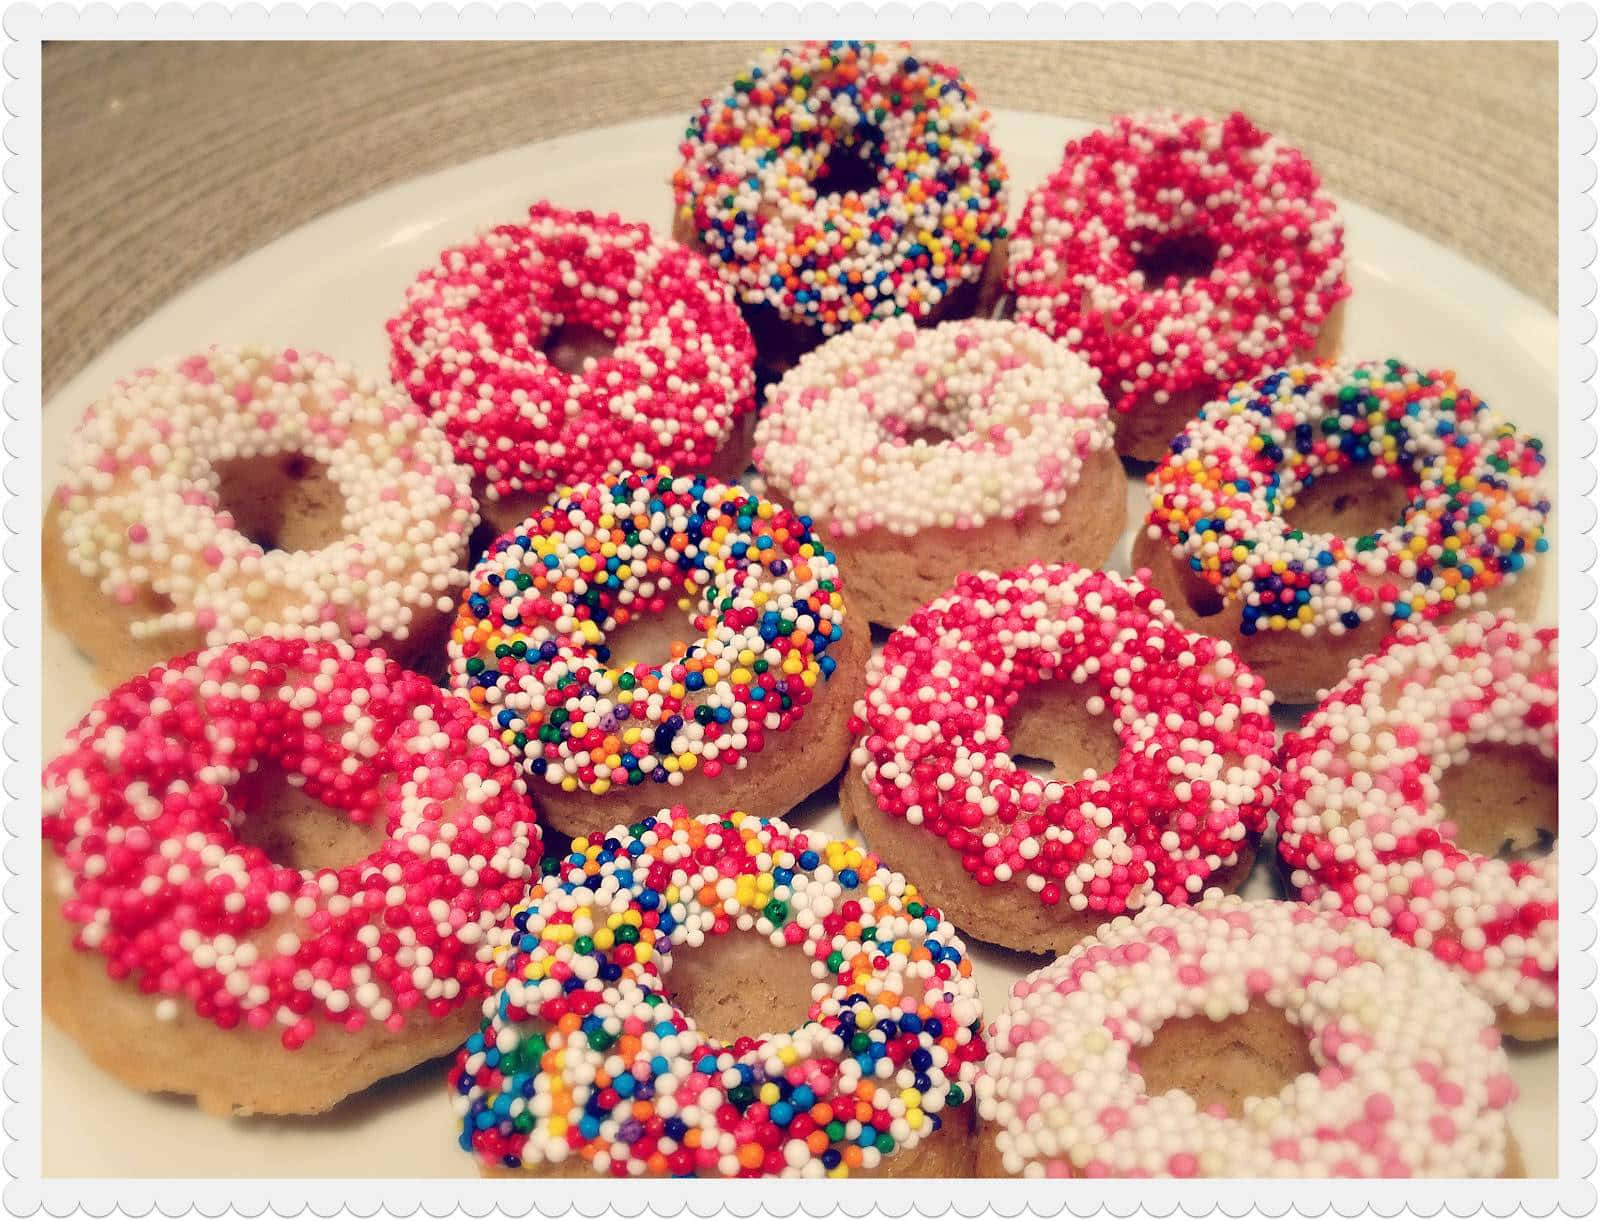 Enjoy a sweet snack with delicious donuts!